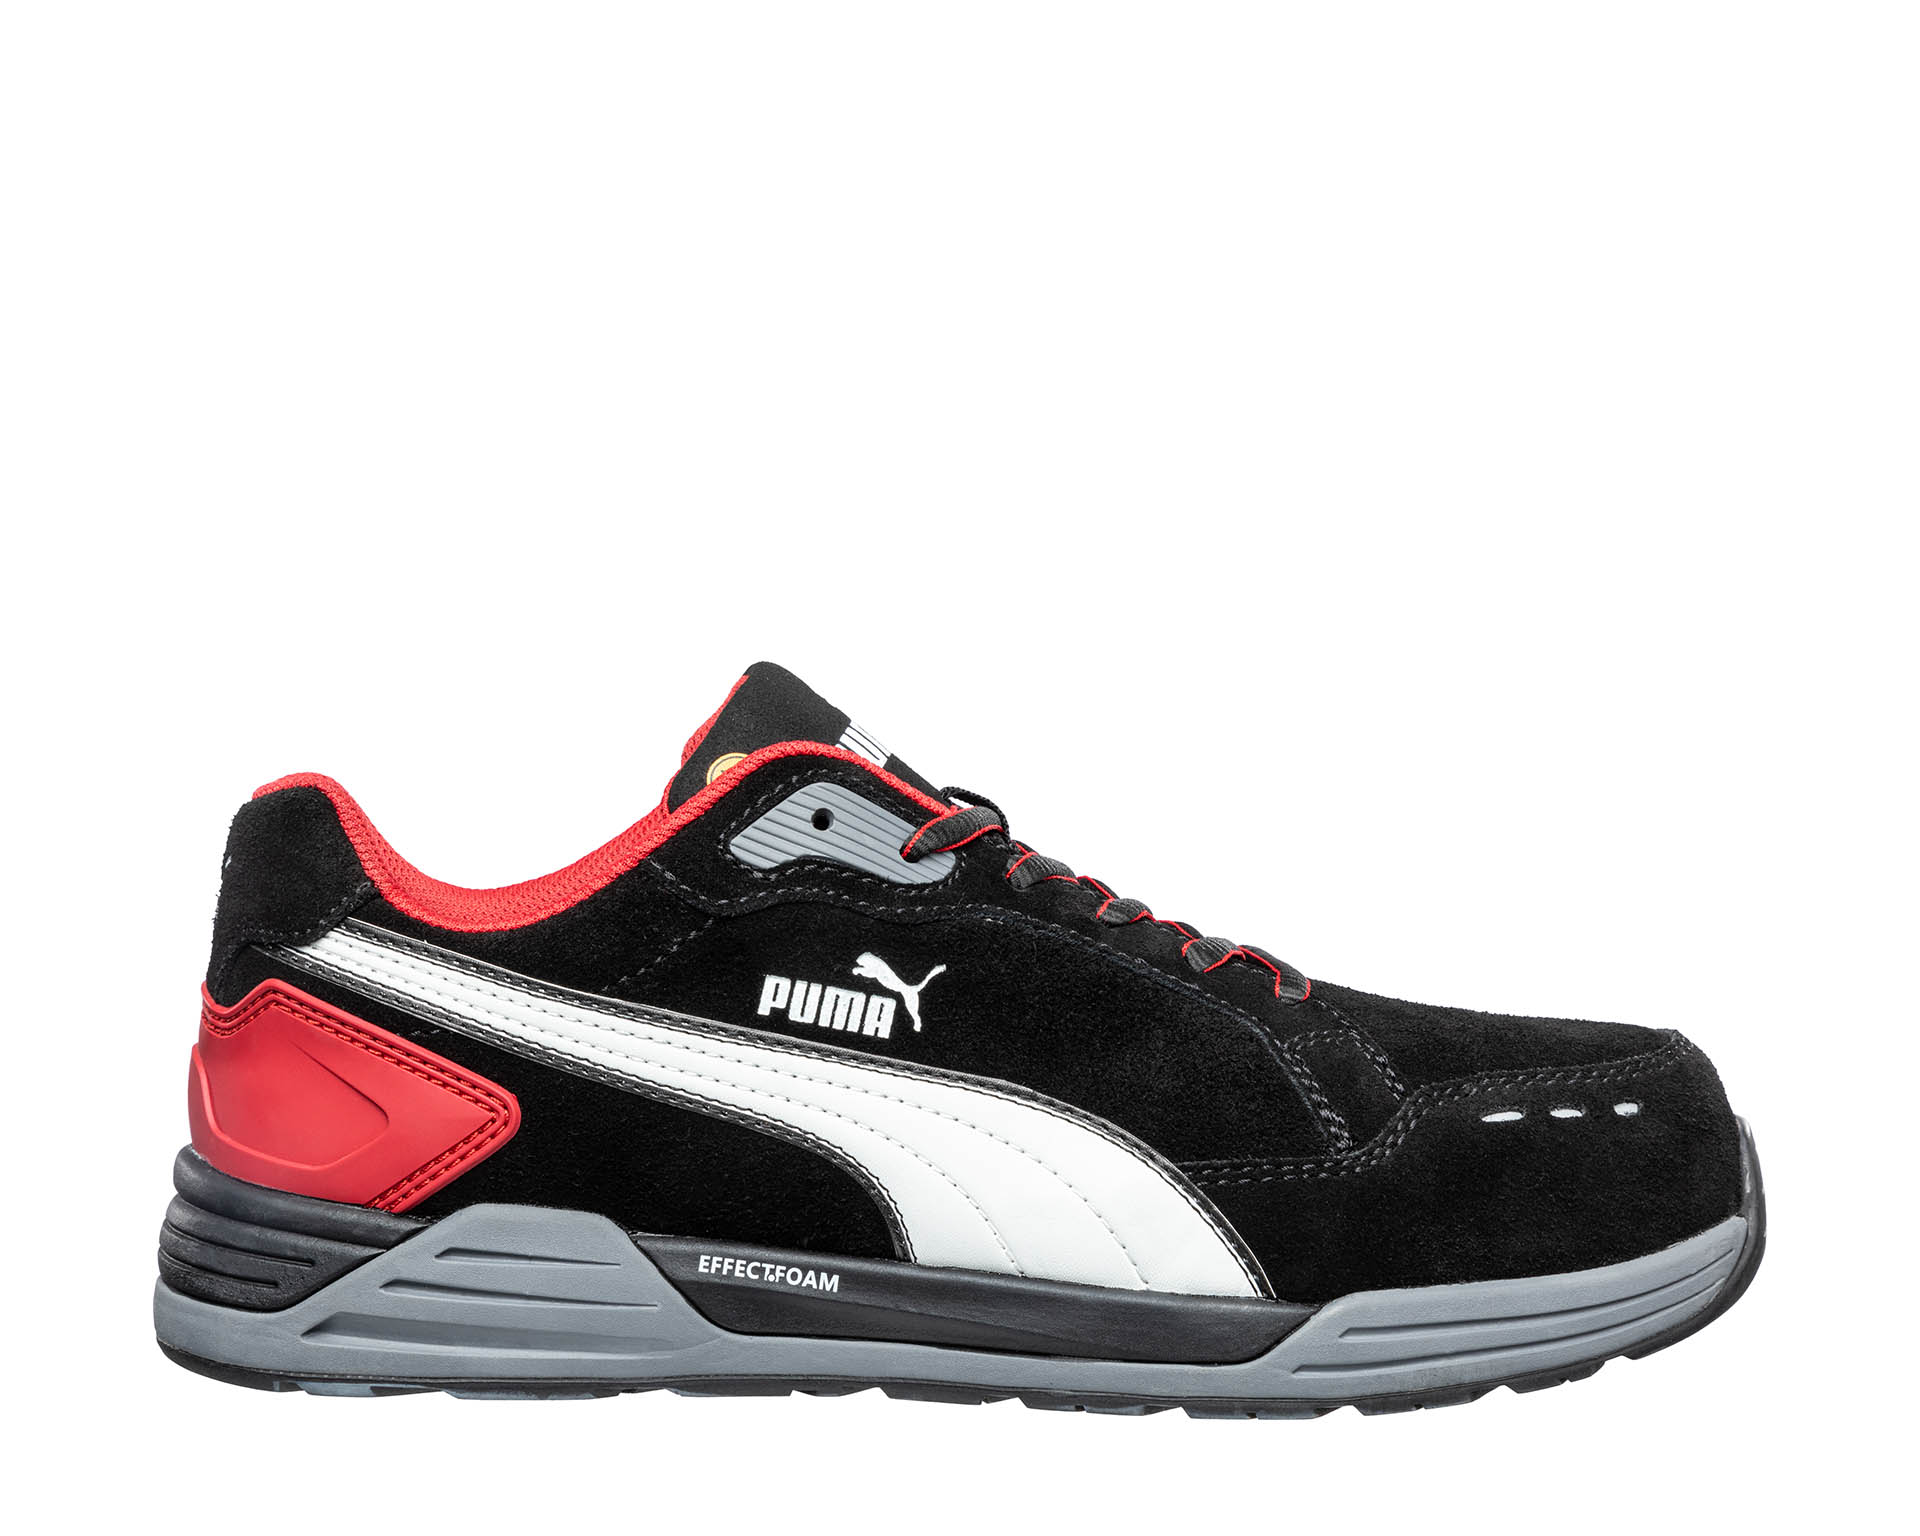 AIRTWIST ESD safety PUMA SAFETY | HRO Puma Safety SRC BLK/RED shoes English LOW S3